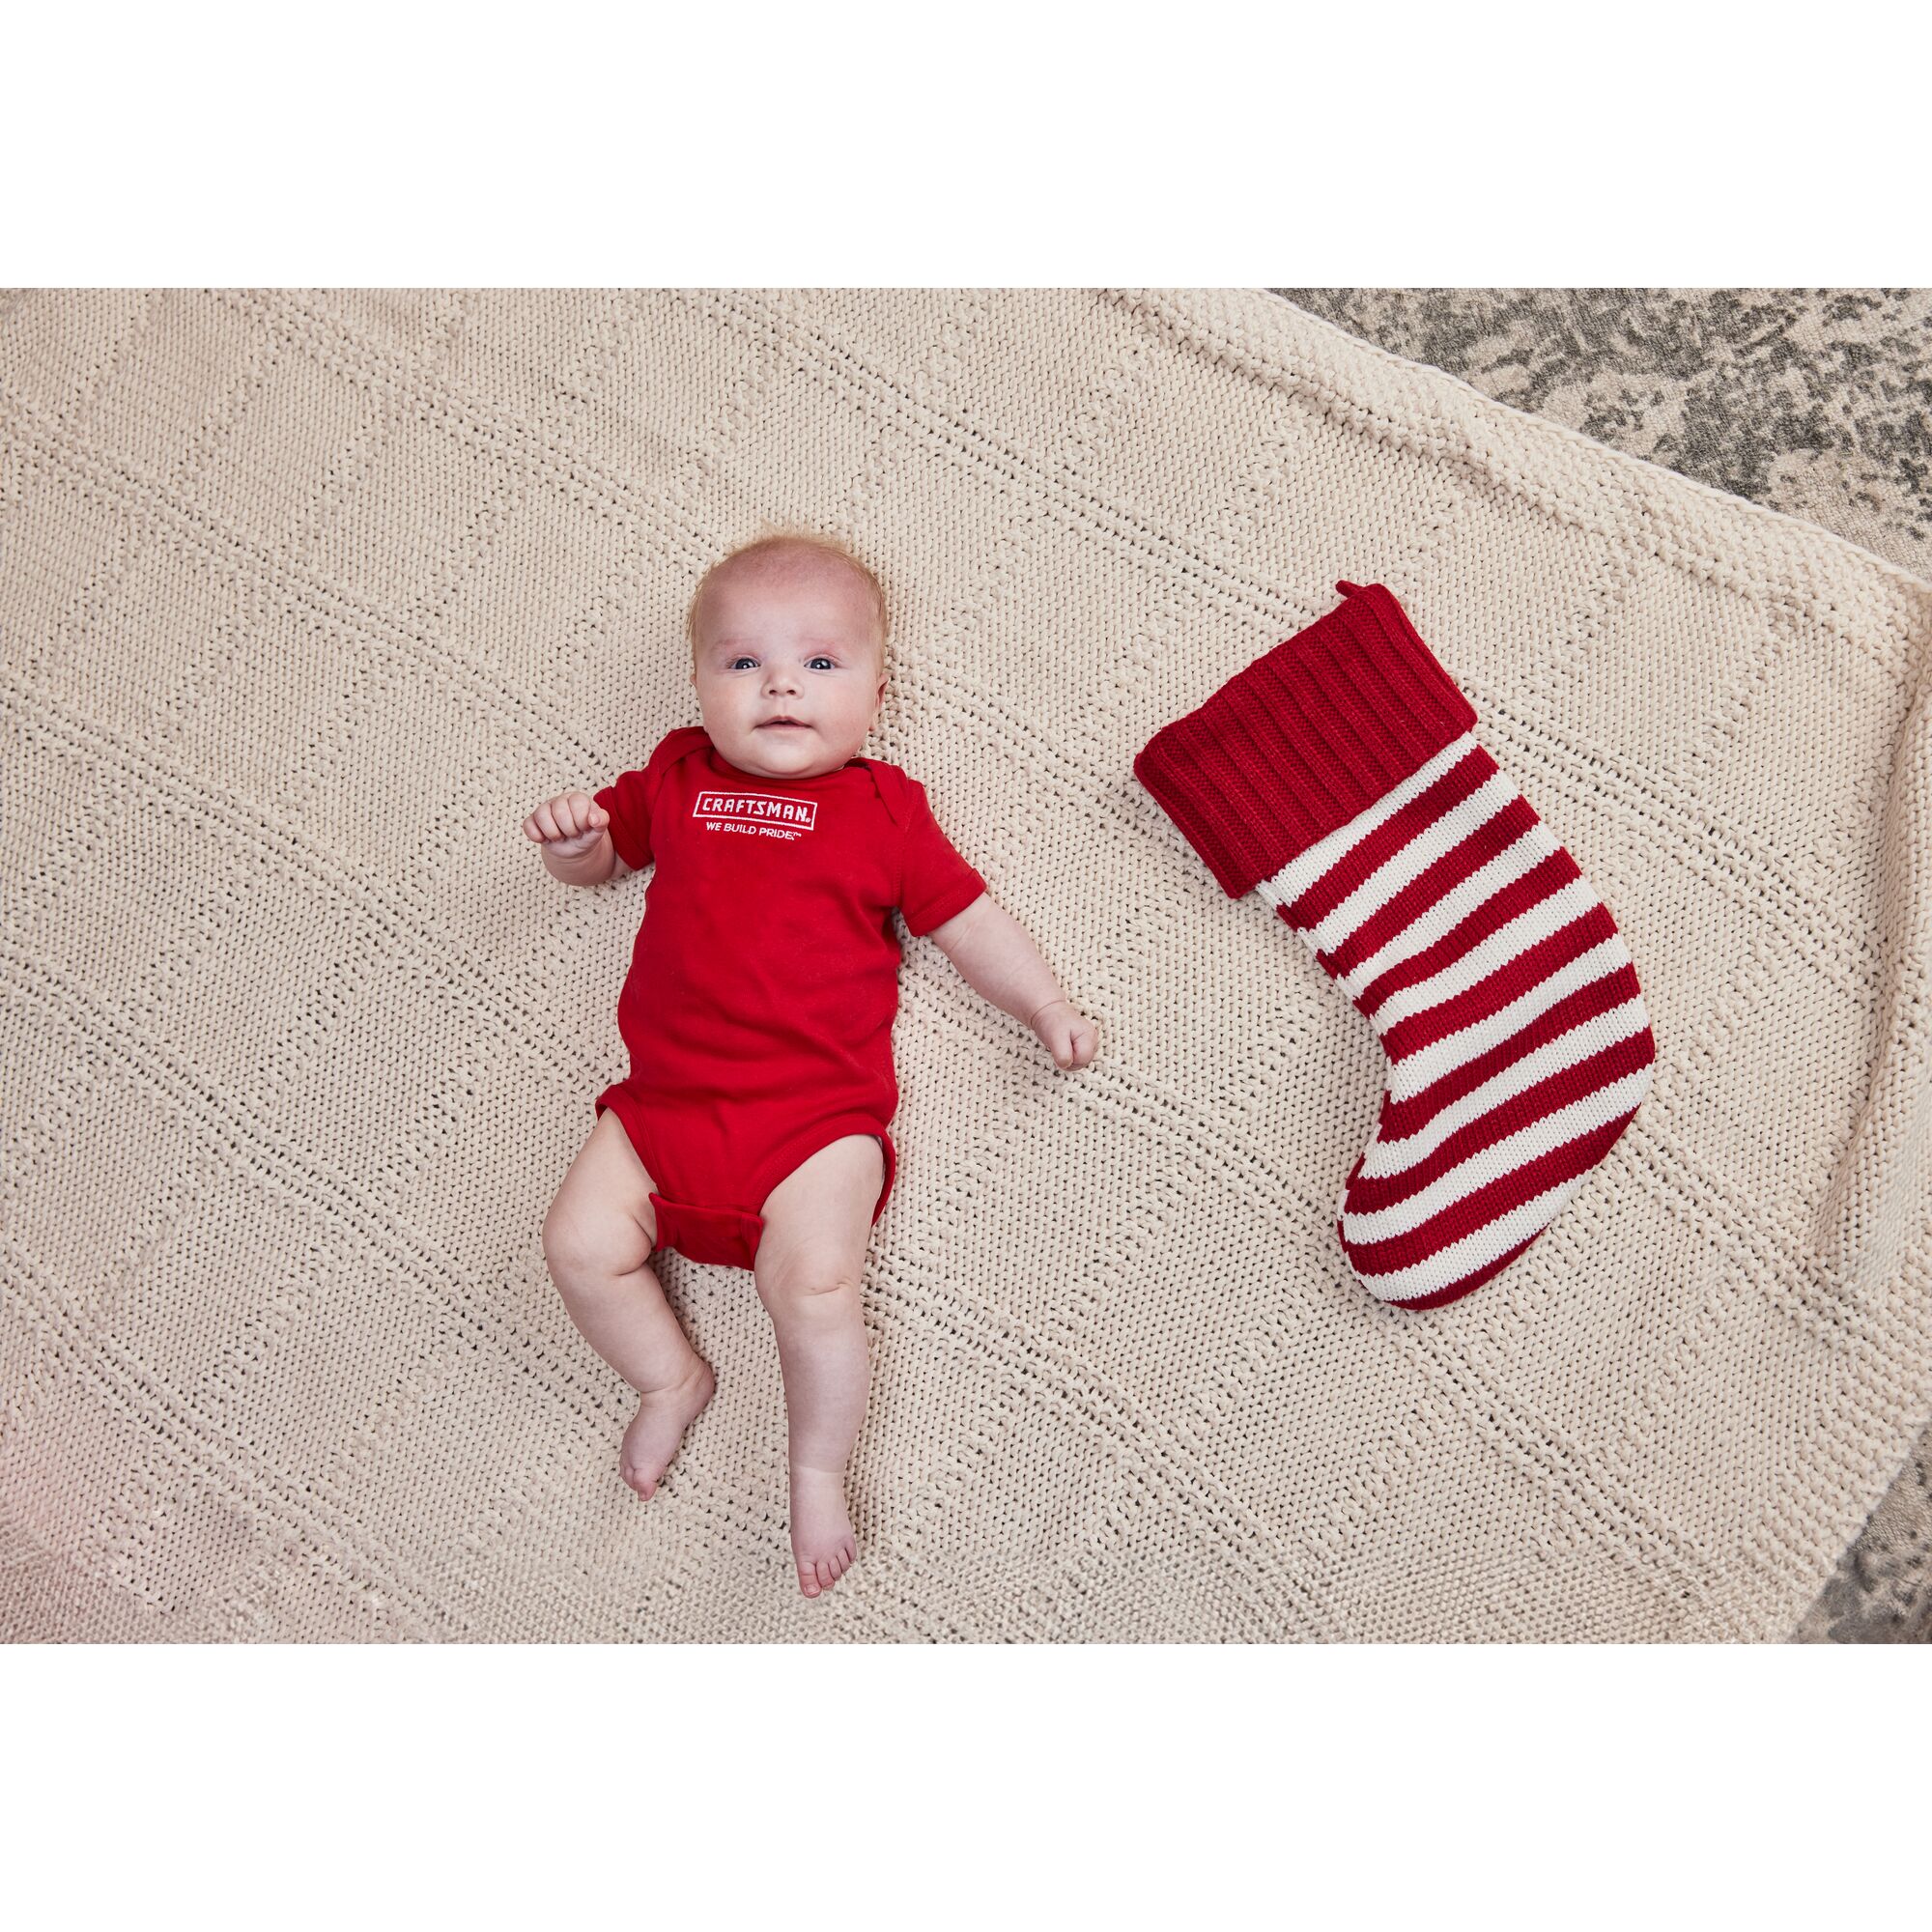 Front View of Baby in CRAFTSMAN Onsie next to Christmas stocking